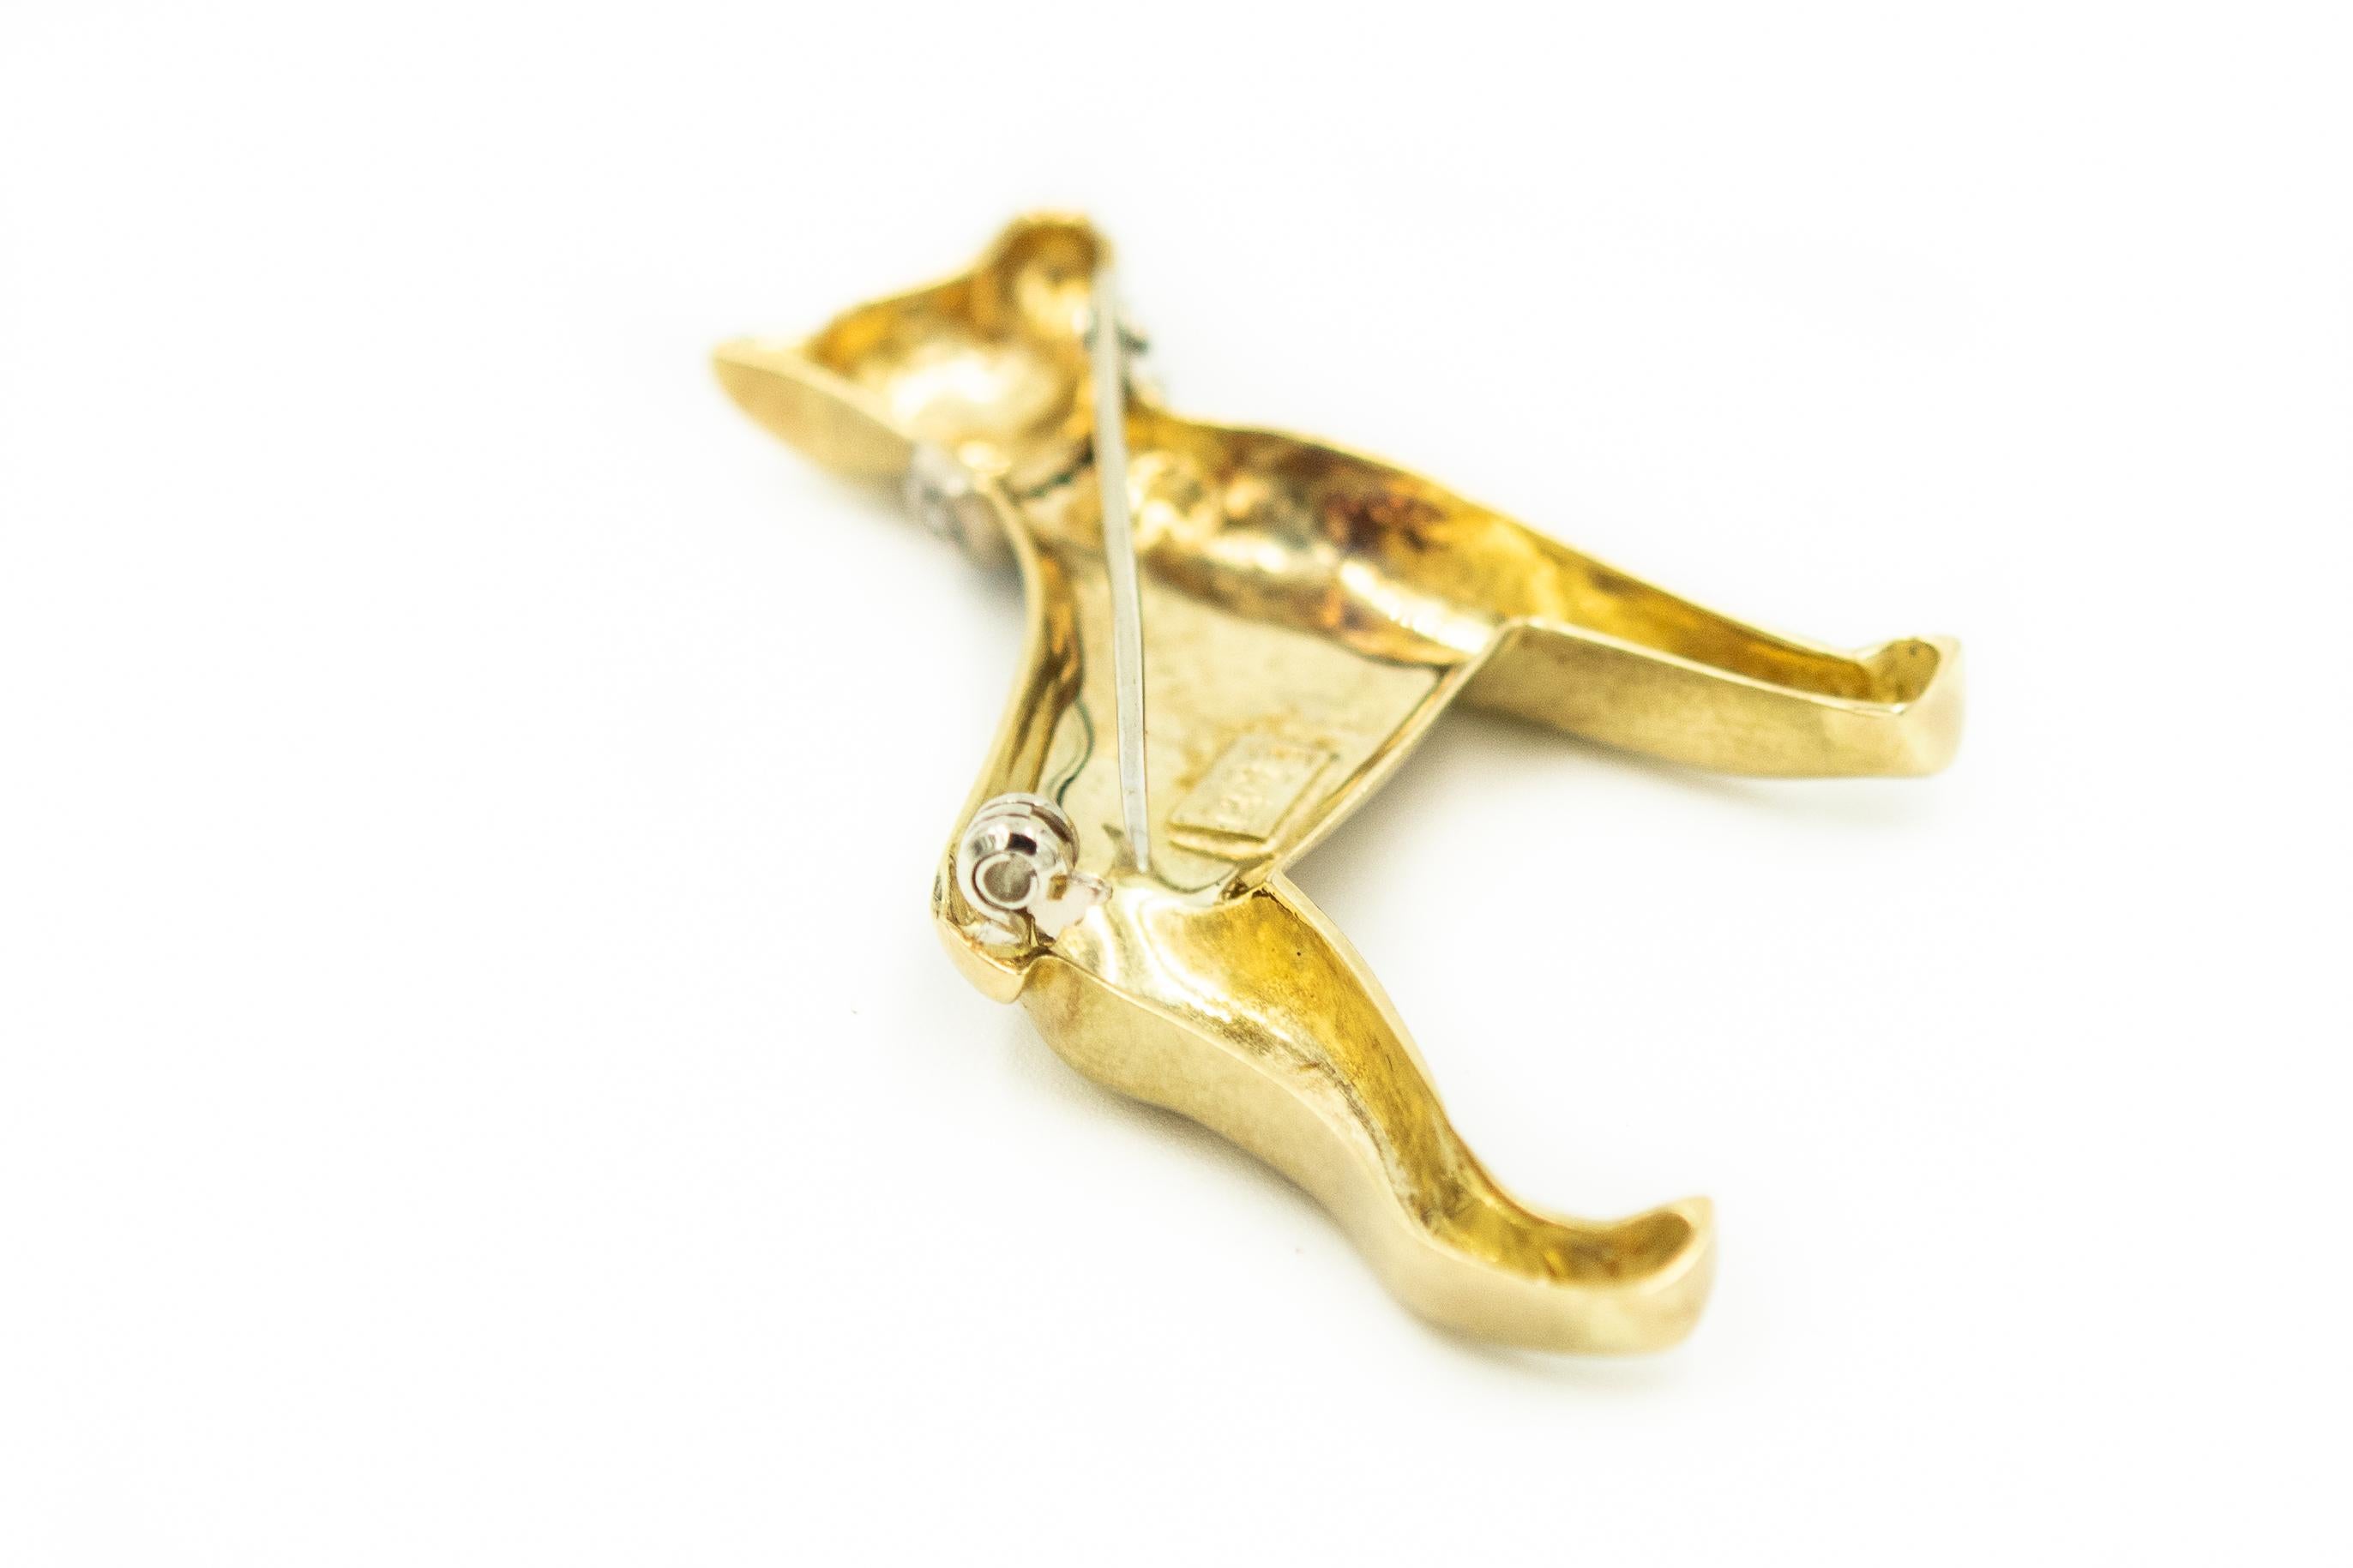 Finely made Italian Doberman Pinscher dog brooch made of 14k yellow gold with a satin finish accented with diamond collar.  The brooch is marked Italy 14k  AU.